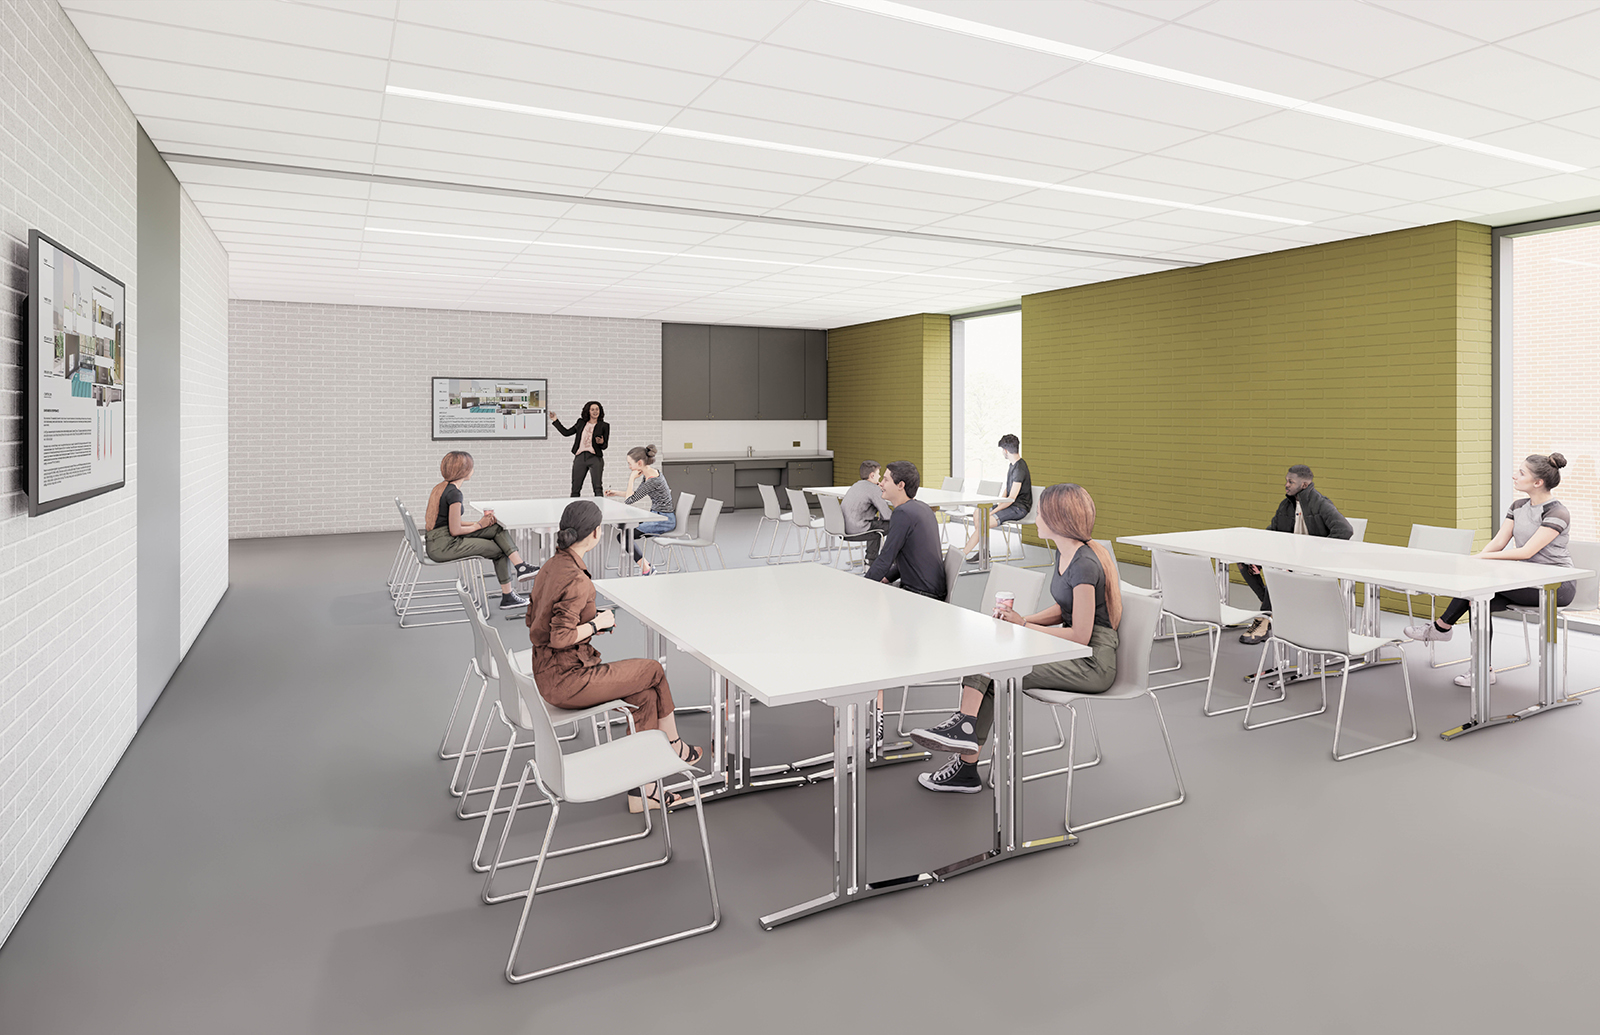 A rendering of a multi-purpose room, set up with tables and chairs in the centre. There is a sink with cupboard storage space on the back wall. On the left and back walls there are large computer screens. There are two large floor to ceiling windows on the right wall. In this rendering, a staff member is teaching a course to participants.